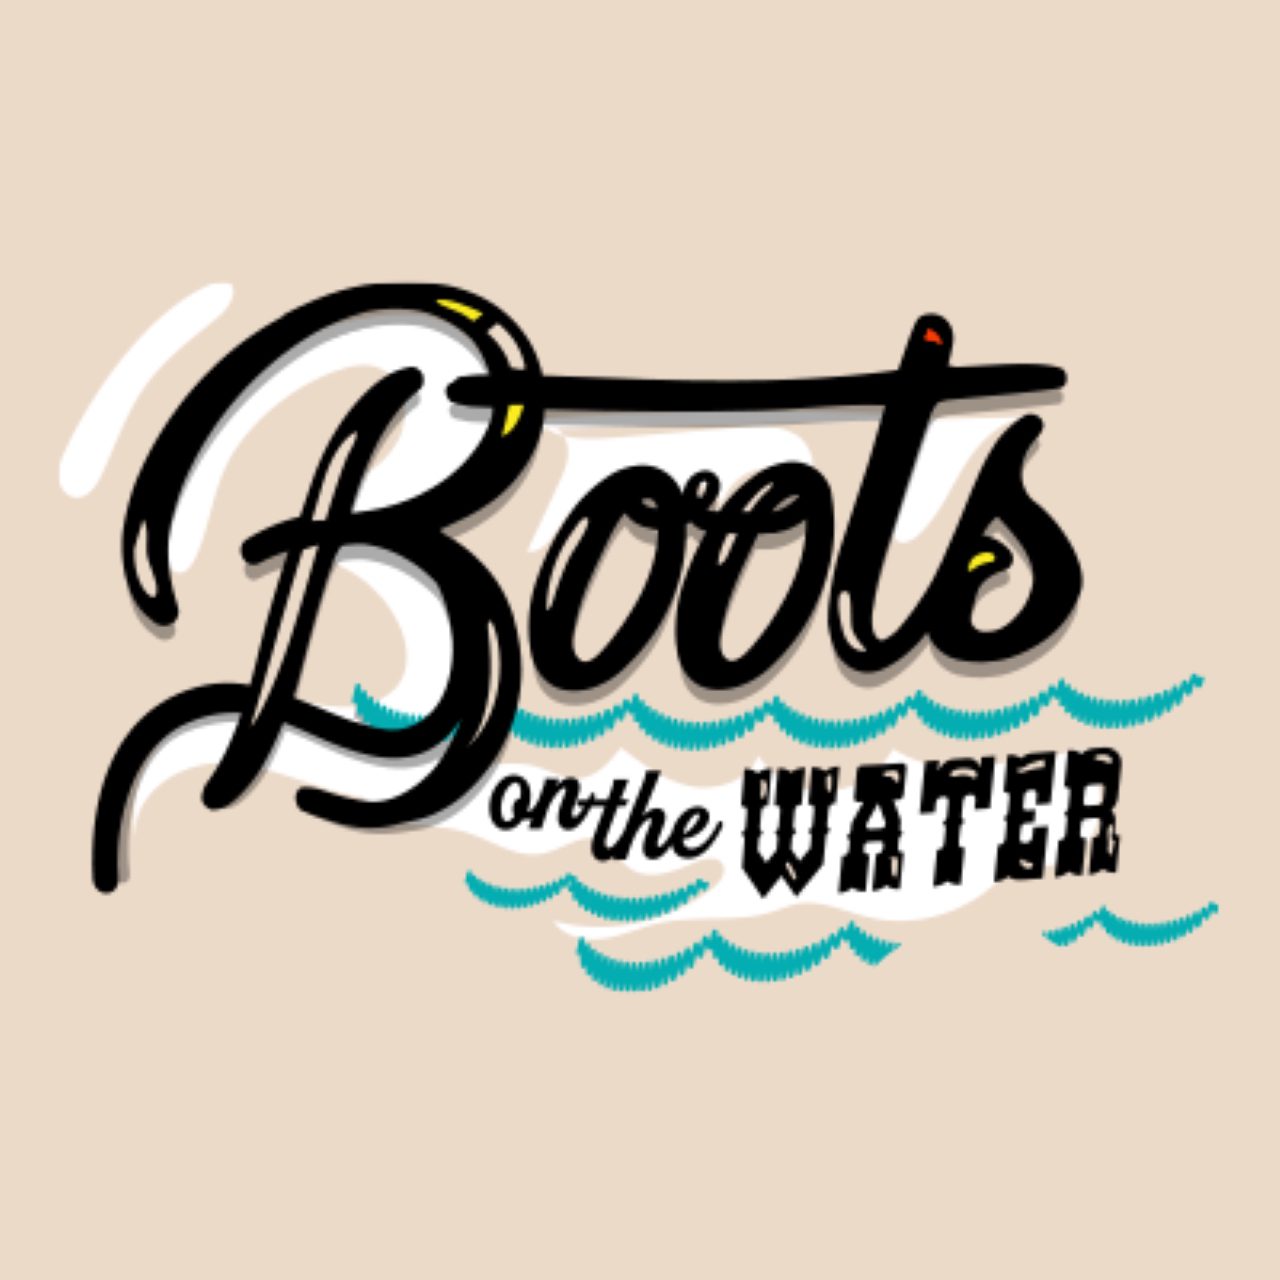 Boots On The Water